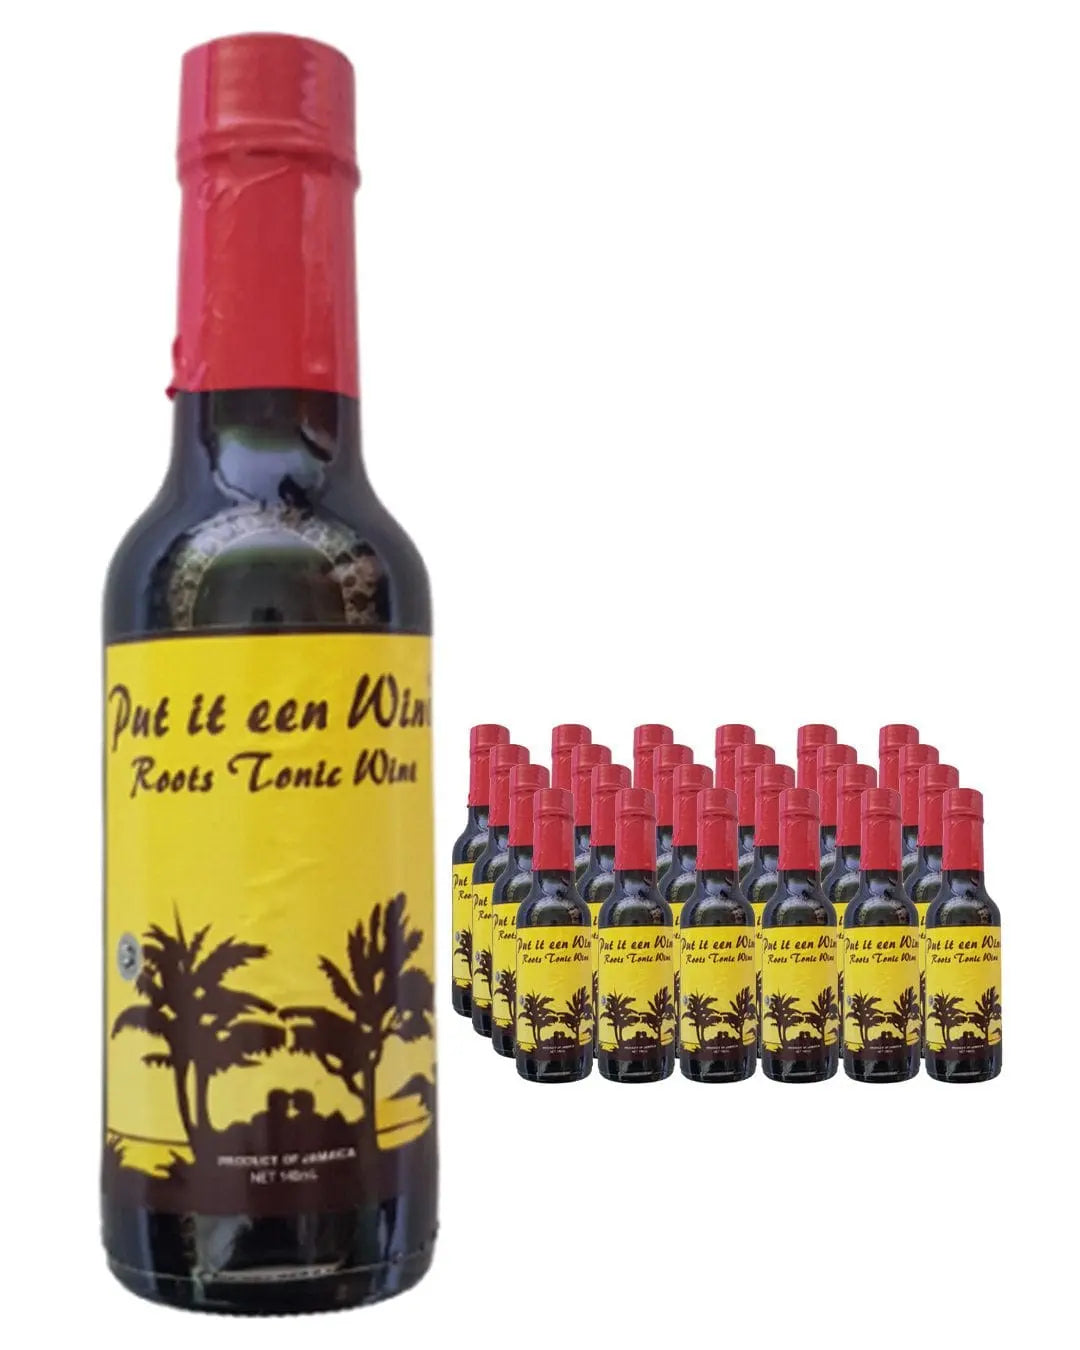 Put It Een Wine Roots Tonic Wine Multipack, 24 x 148 ml Fortified & Other Wines